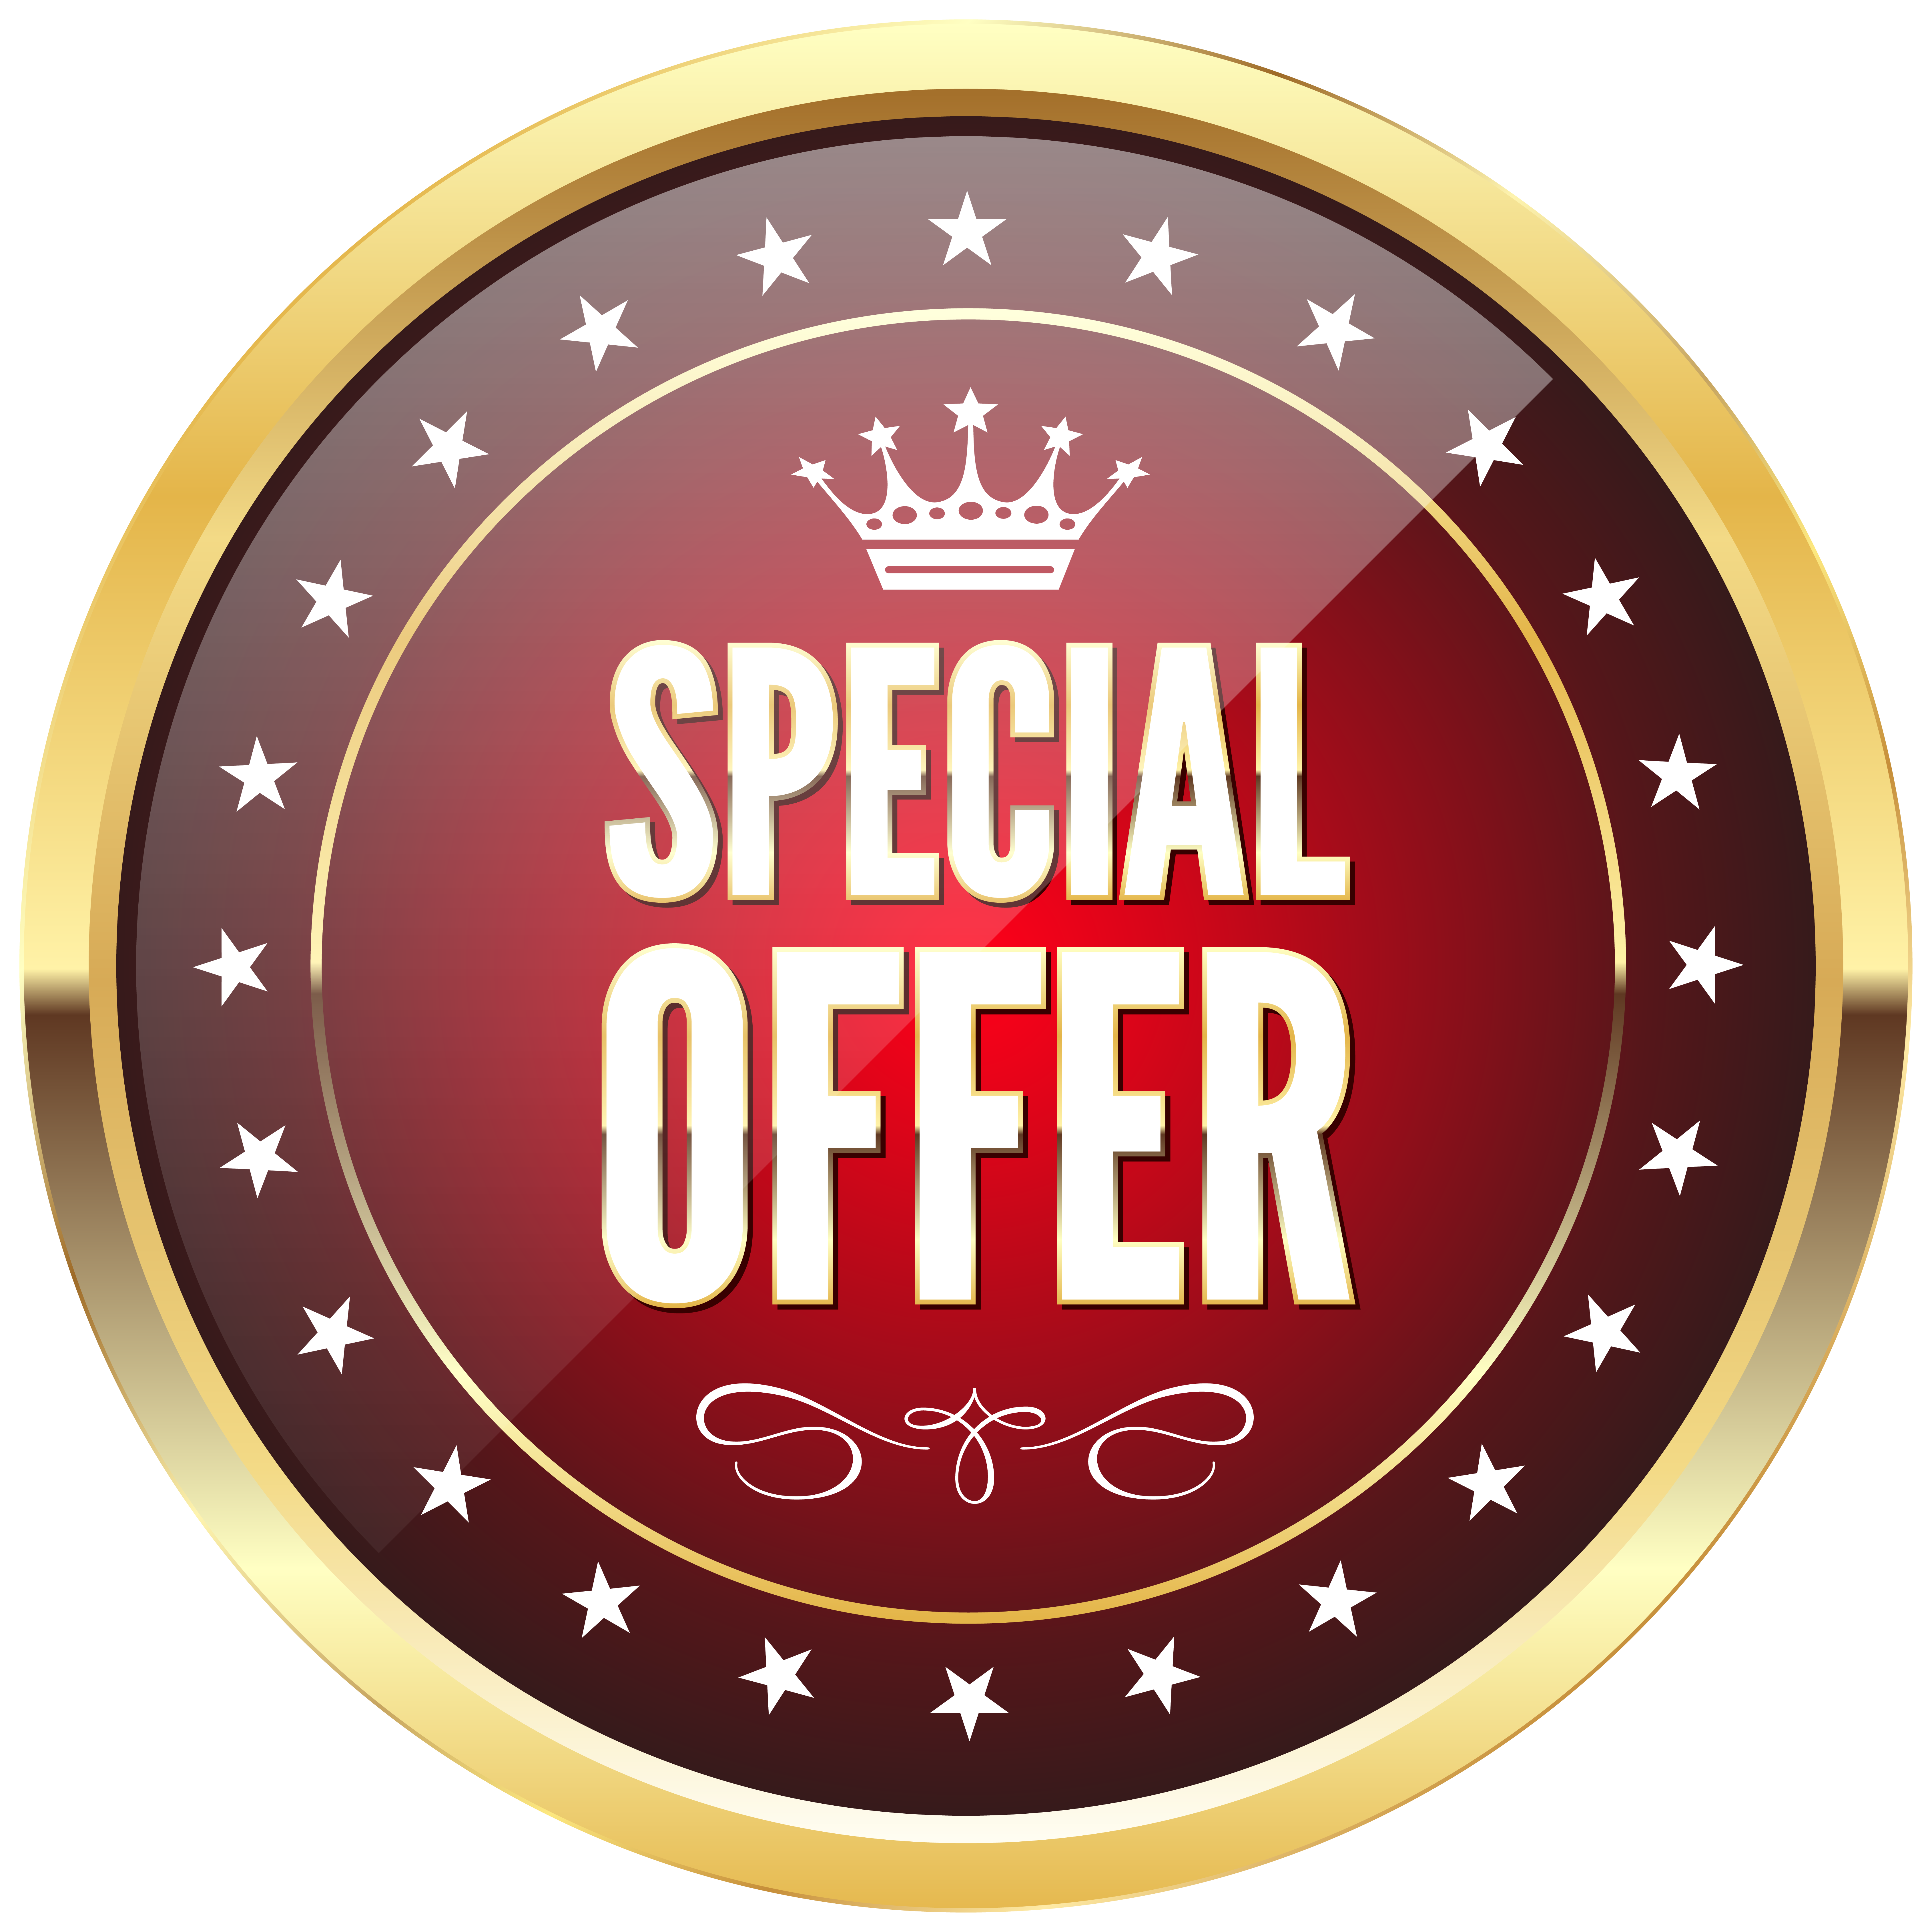 special offer clipart